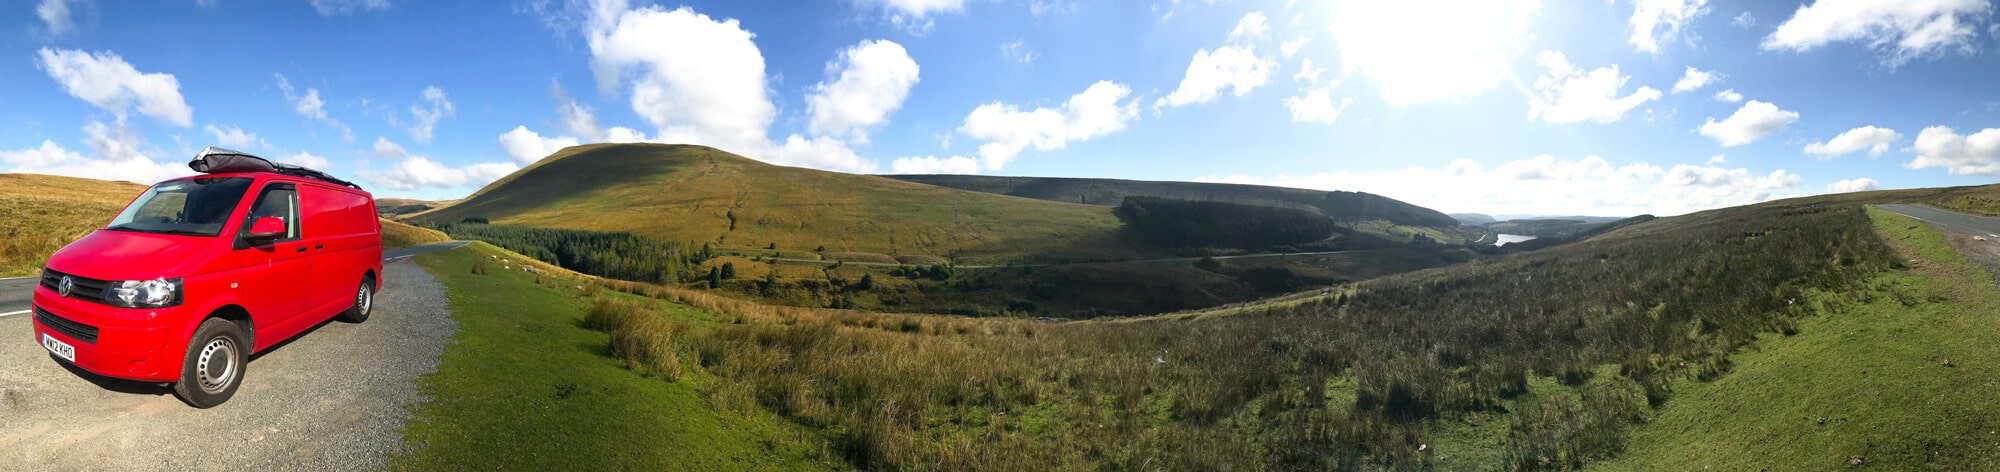 panorama of campervan in the hills